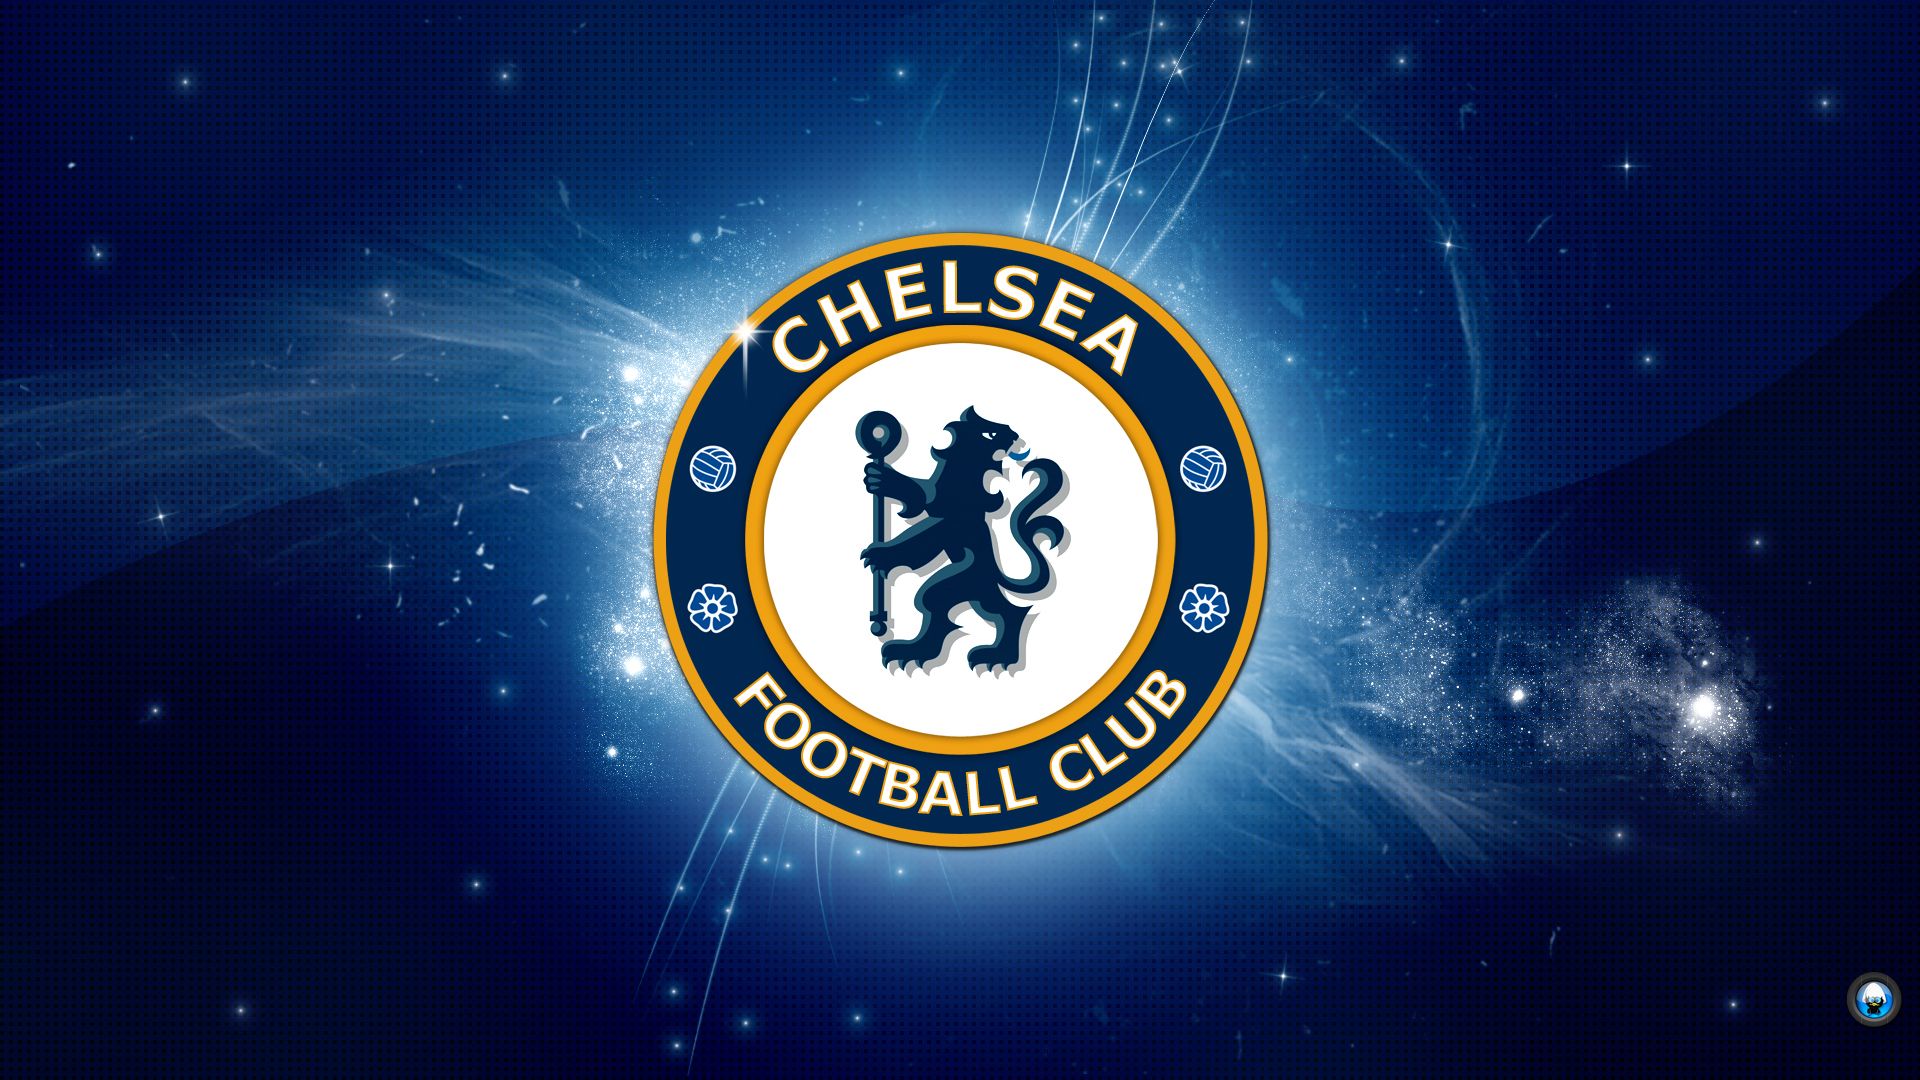 Chelsea FC From West London Best High Quality In HD Wallpaper Widescreen. wallsmax.com HD Wallpaper & Background